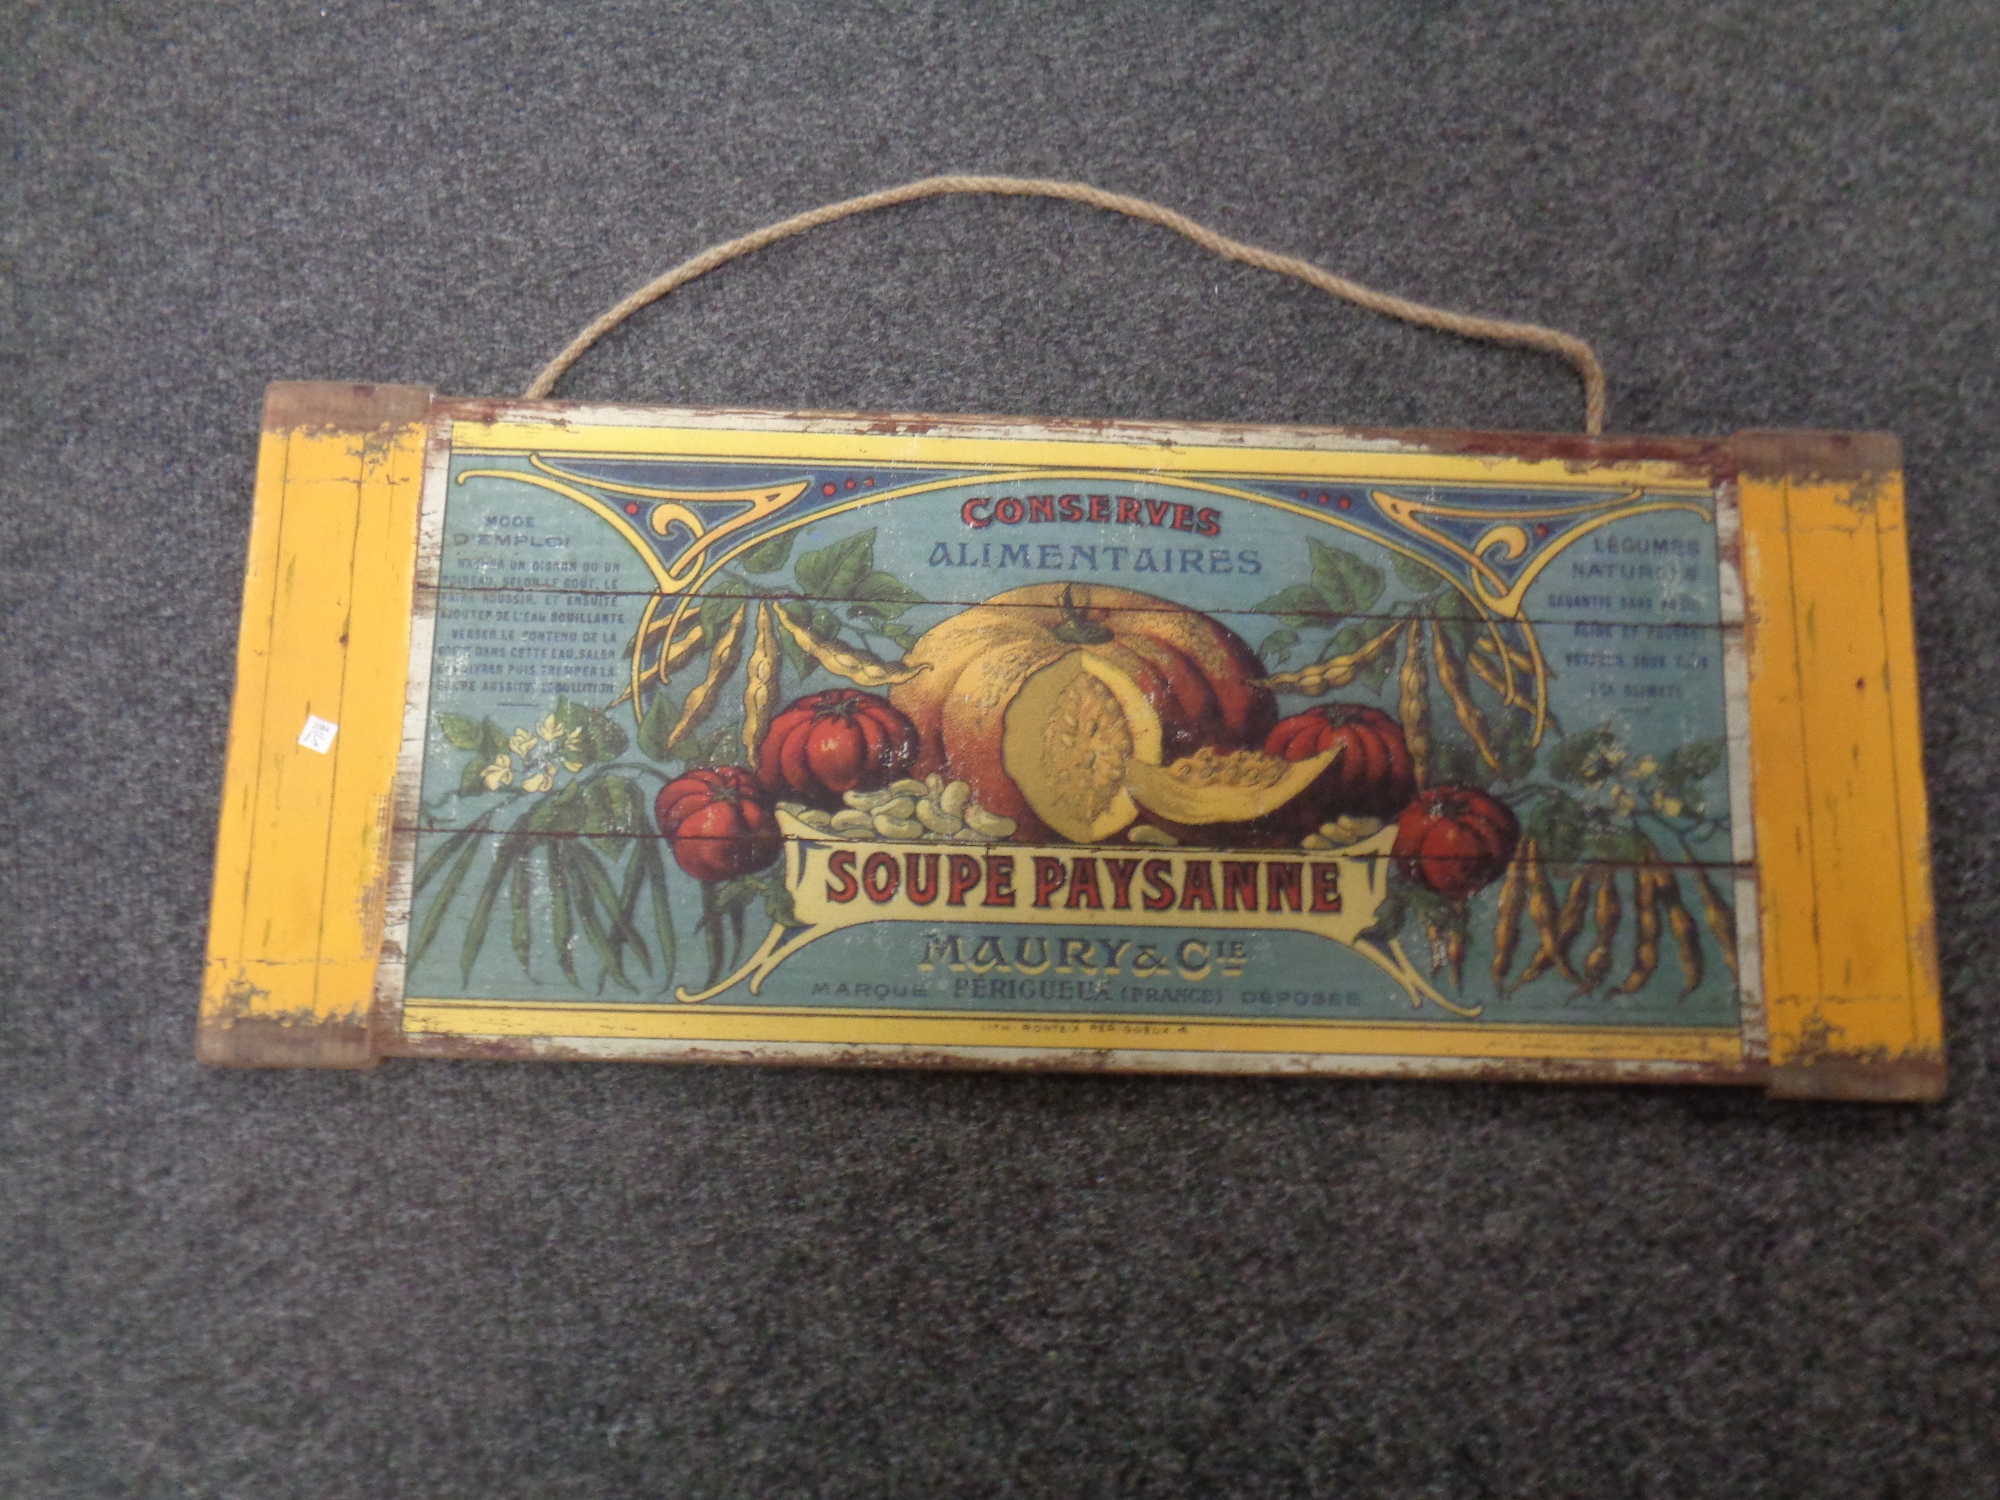 A French Soupe Paysanne advertisement on a pine board